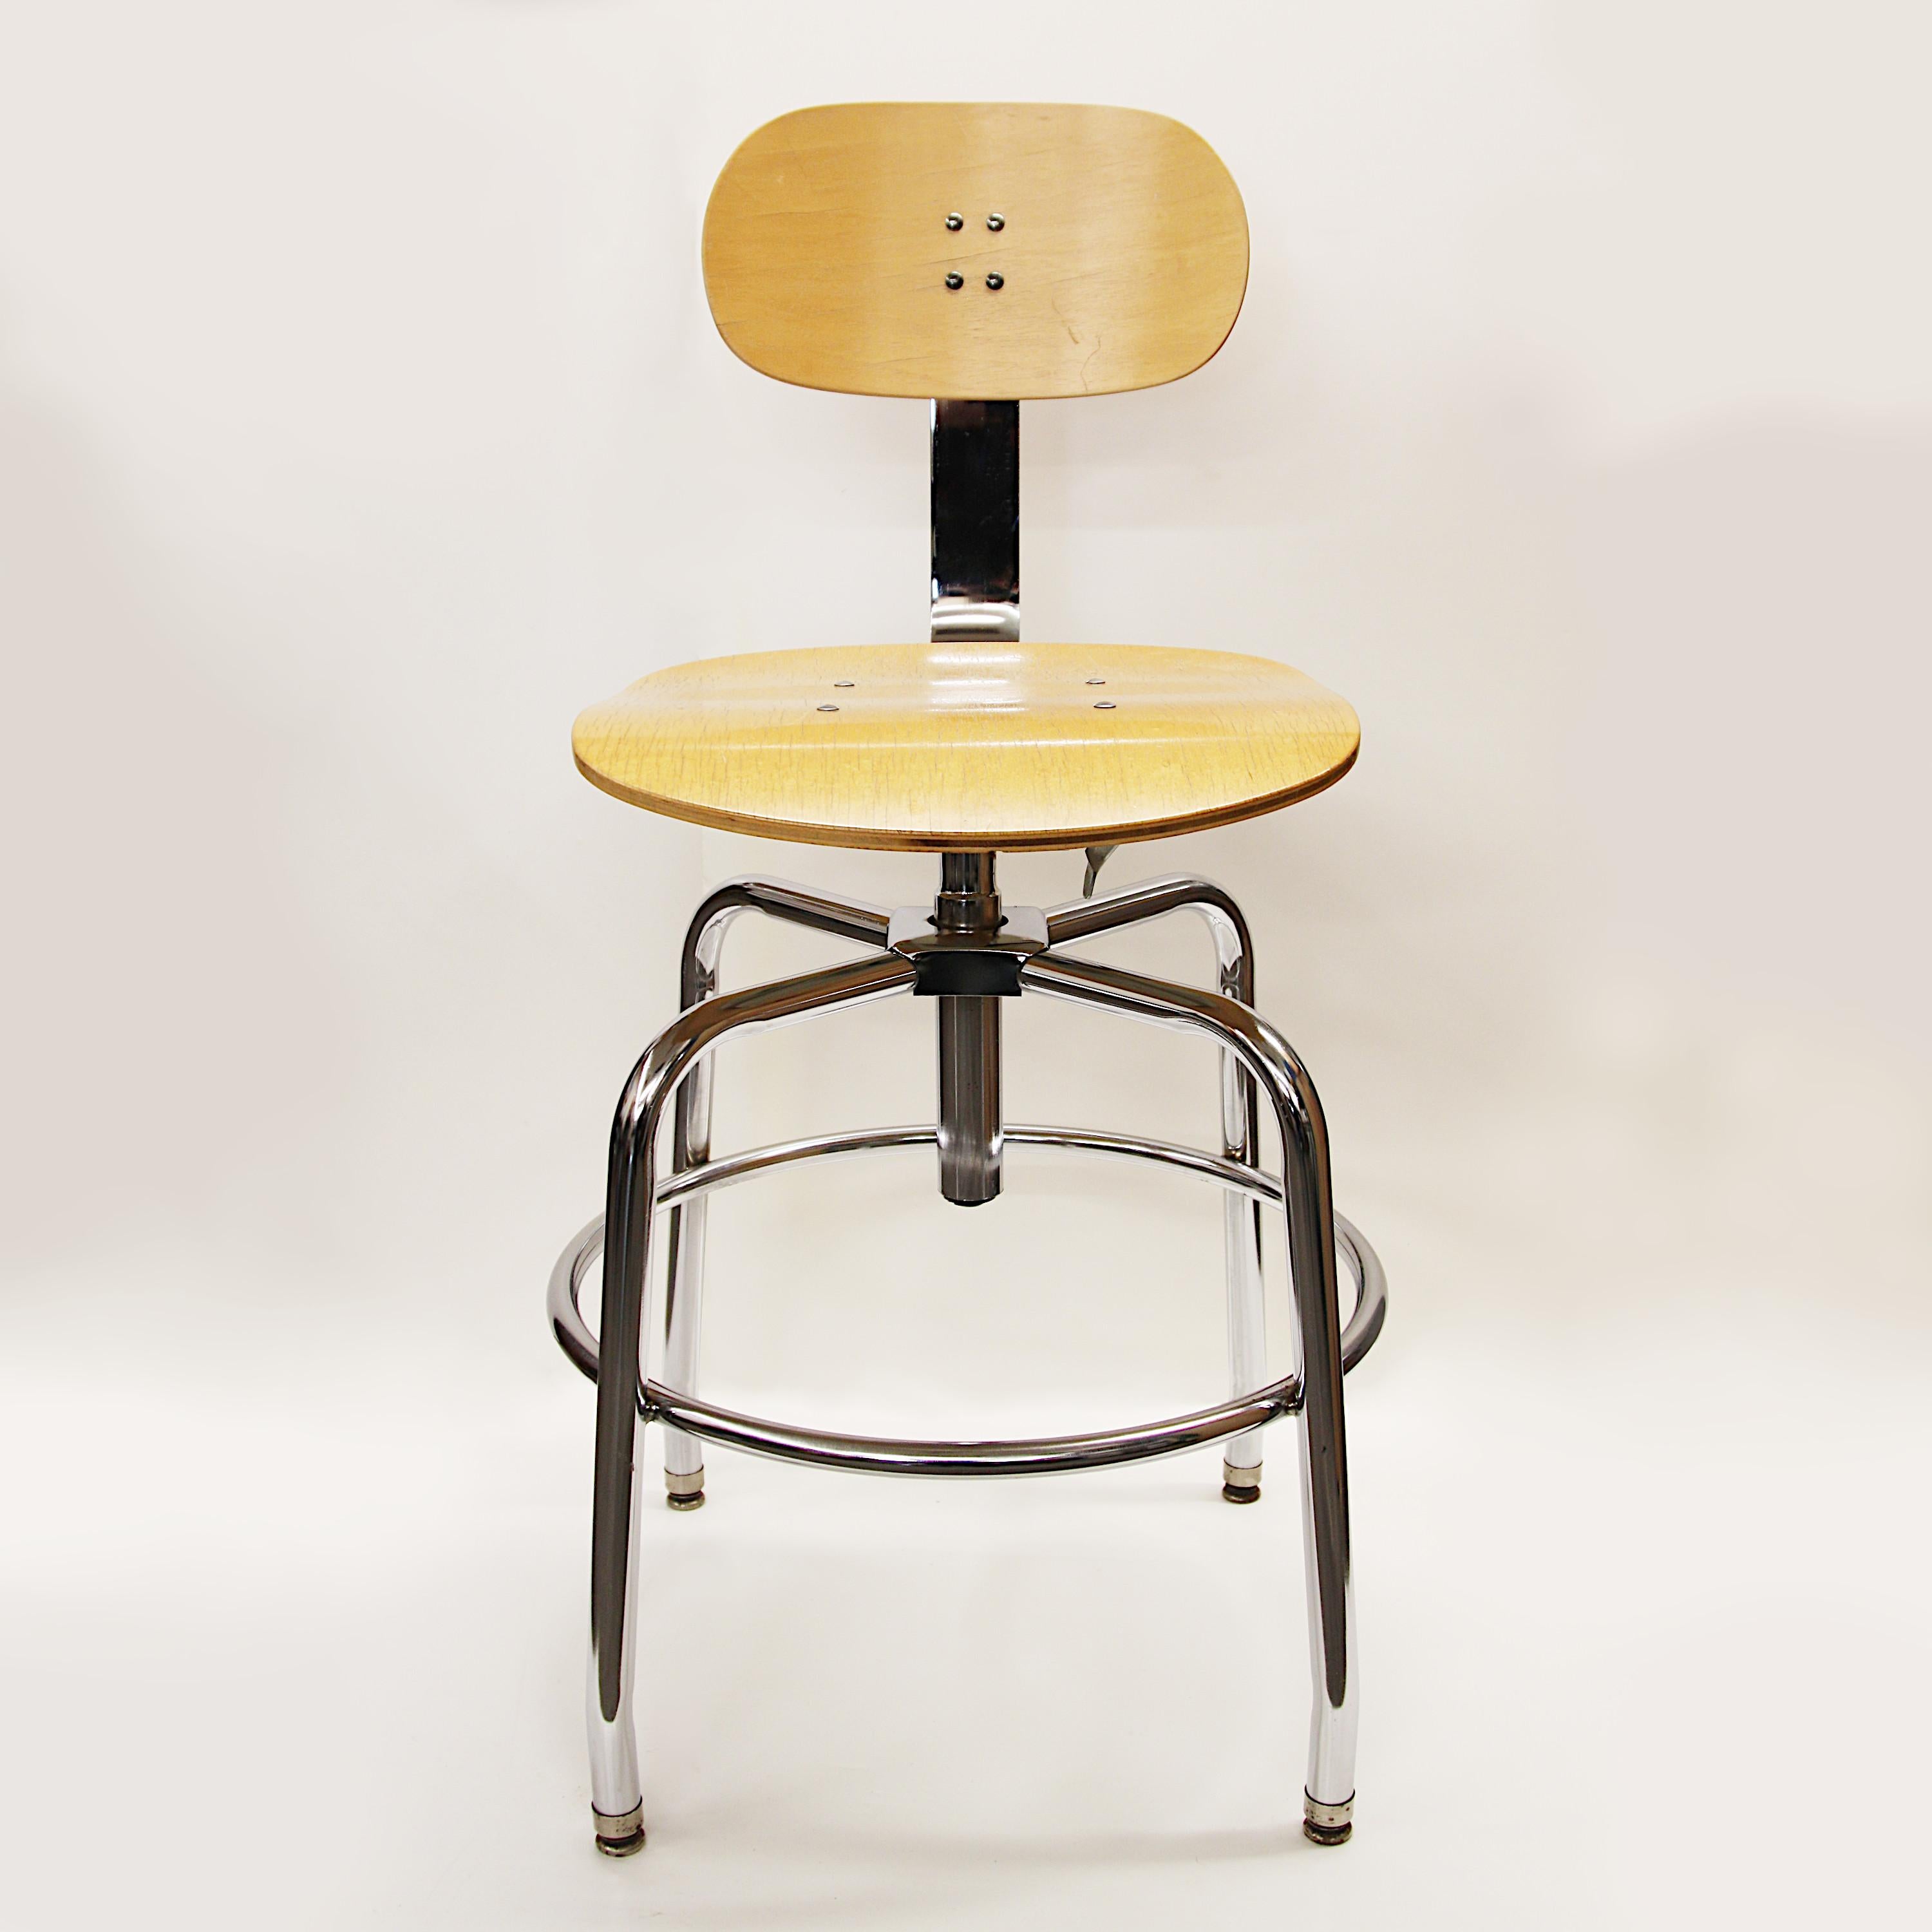 Vintage Mid-Century Modern Maple & Chrome Industrial Bar Drafting Stools In Good Condition For Sale In Lafayette, IN